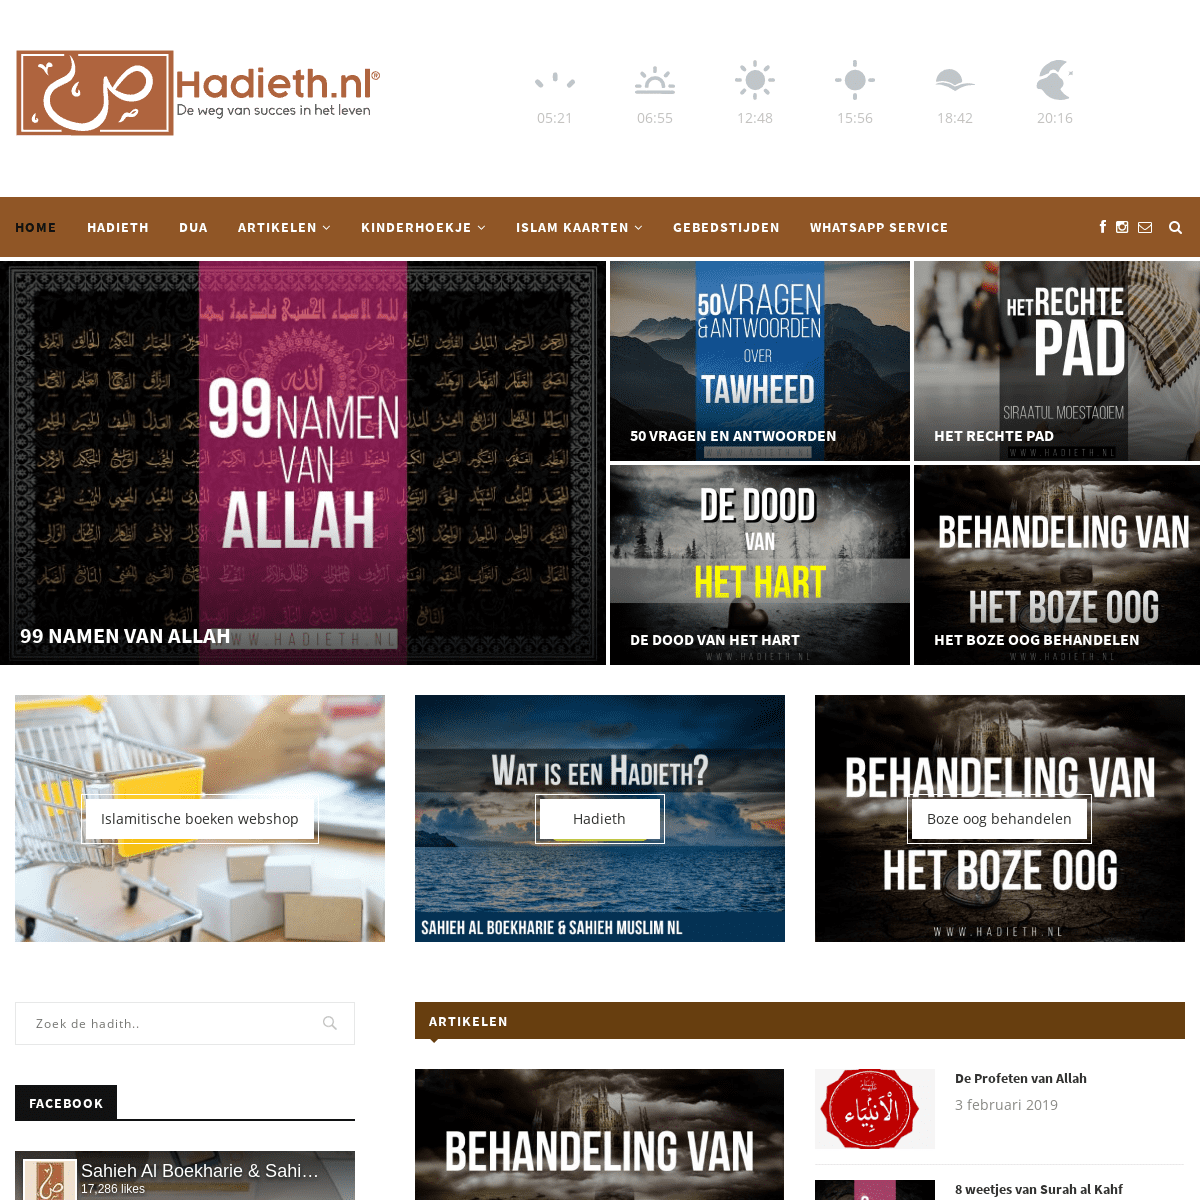 A complete backup of hadieth.nl